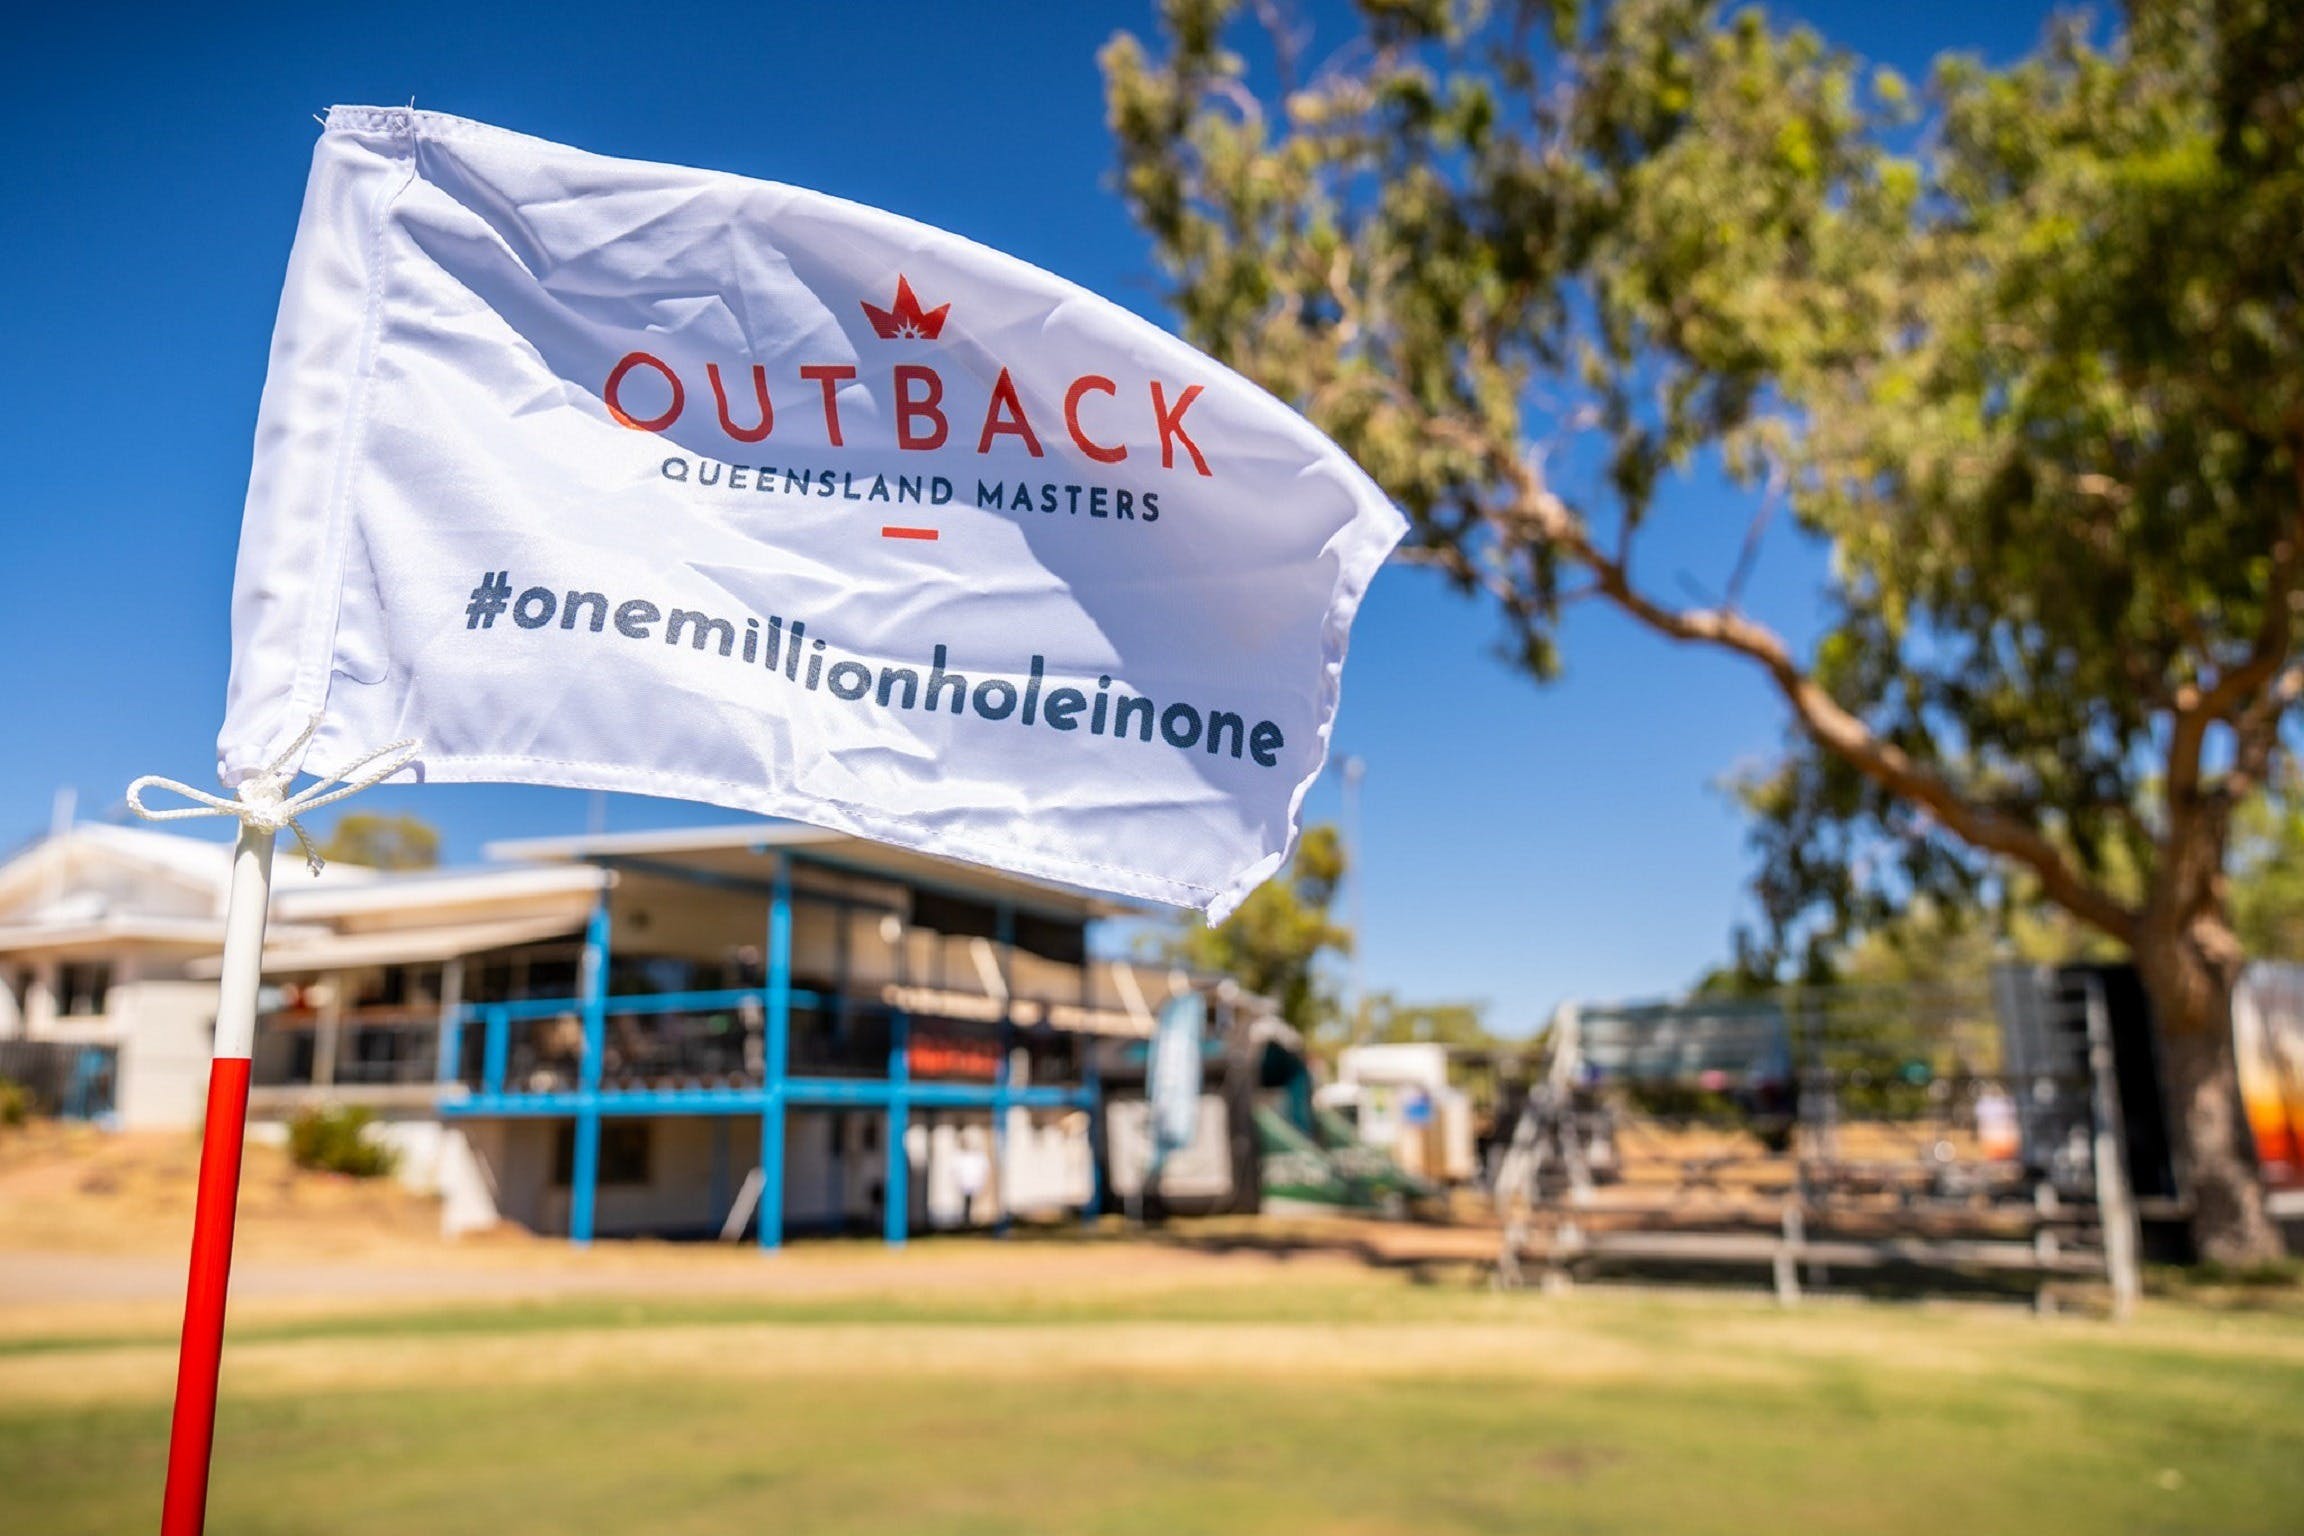 Outback Queensland Masters Charleville Leg 2021 - Casino Accommodation